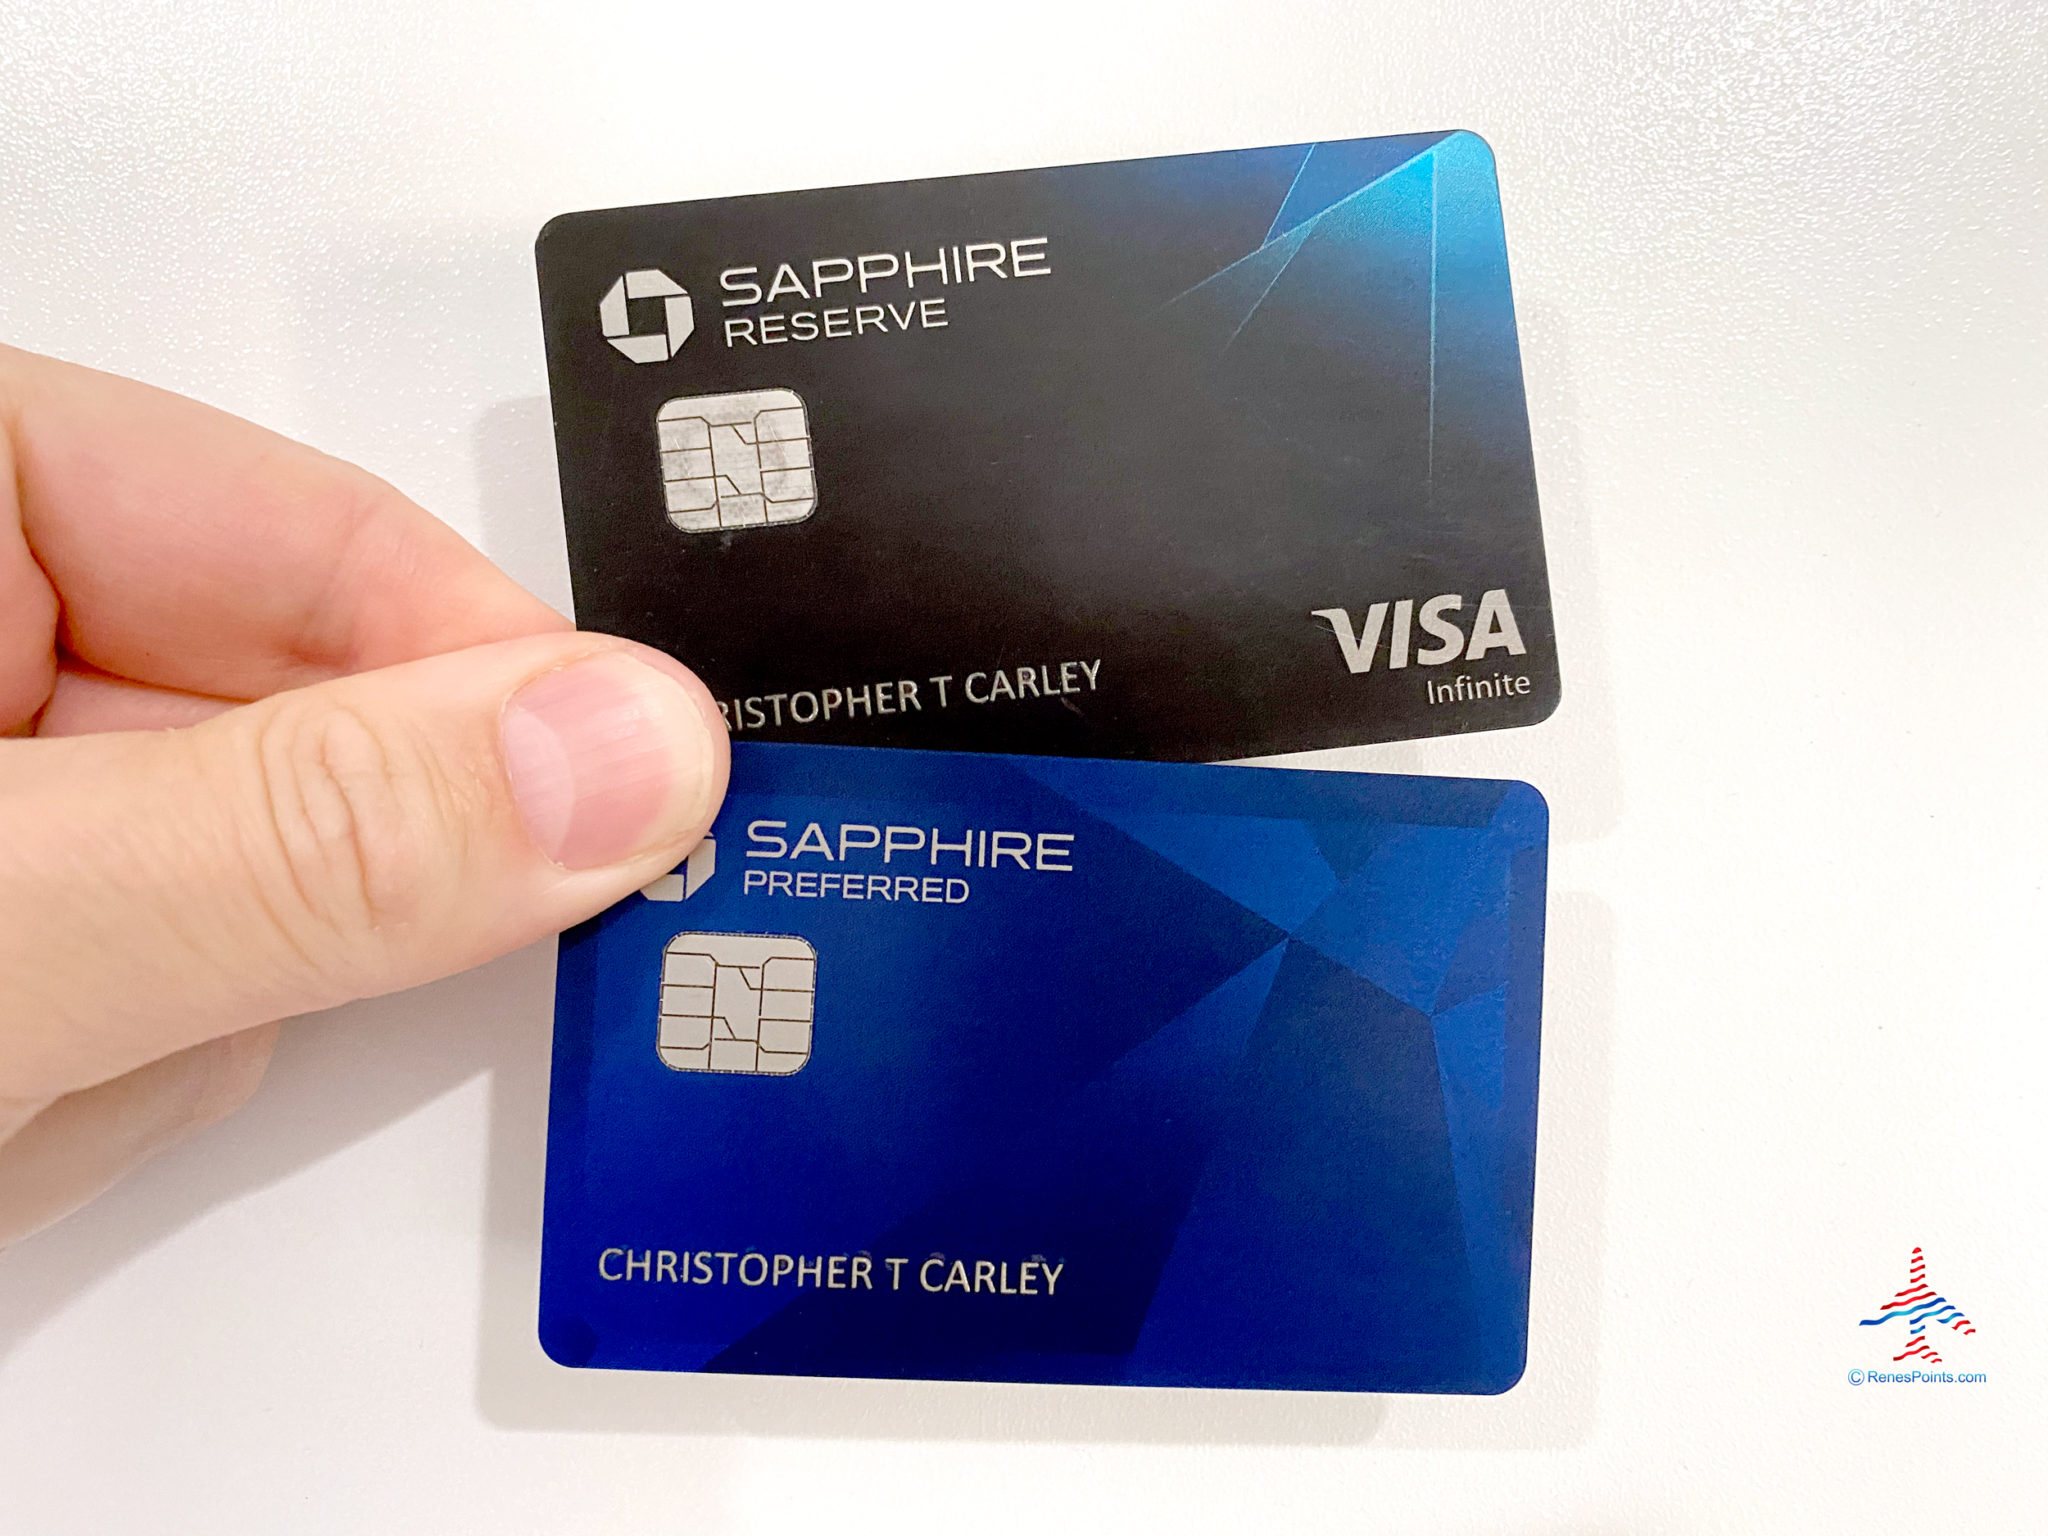 Chase Announces Several Additions to the Sapphire Preferred and